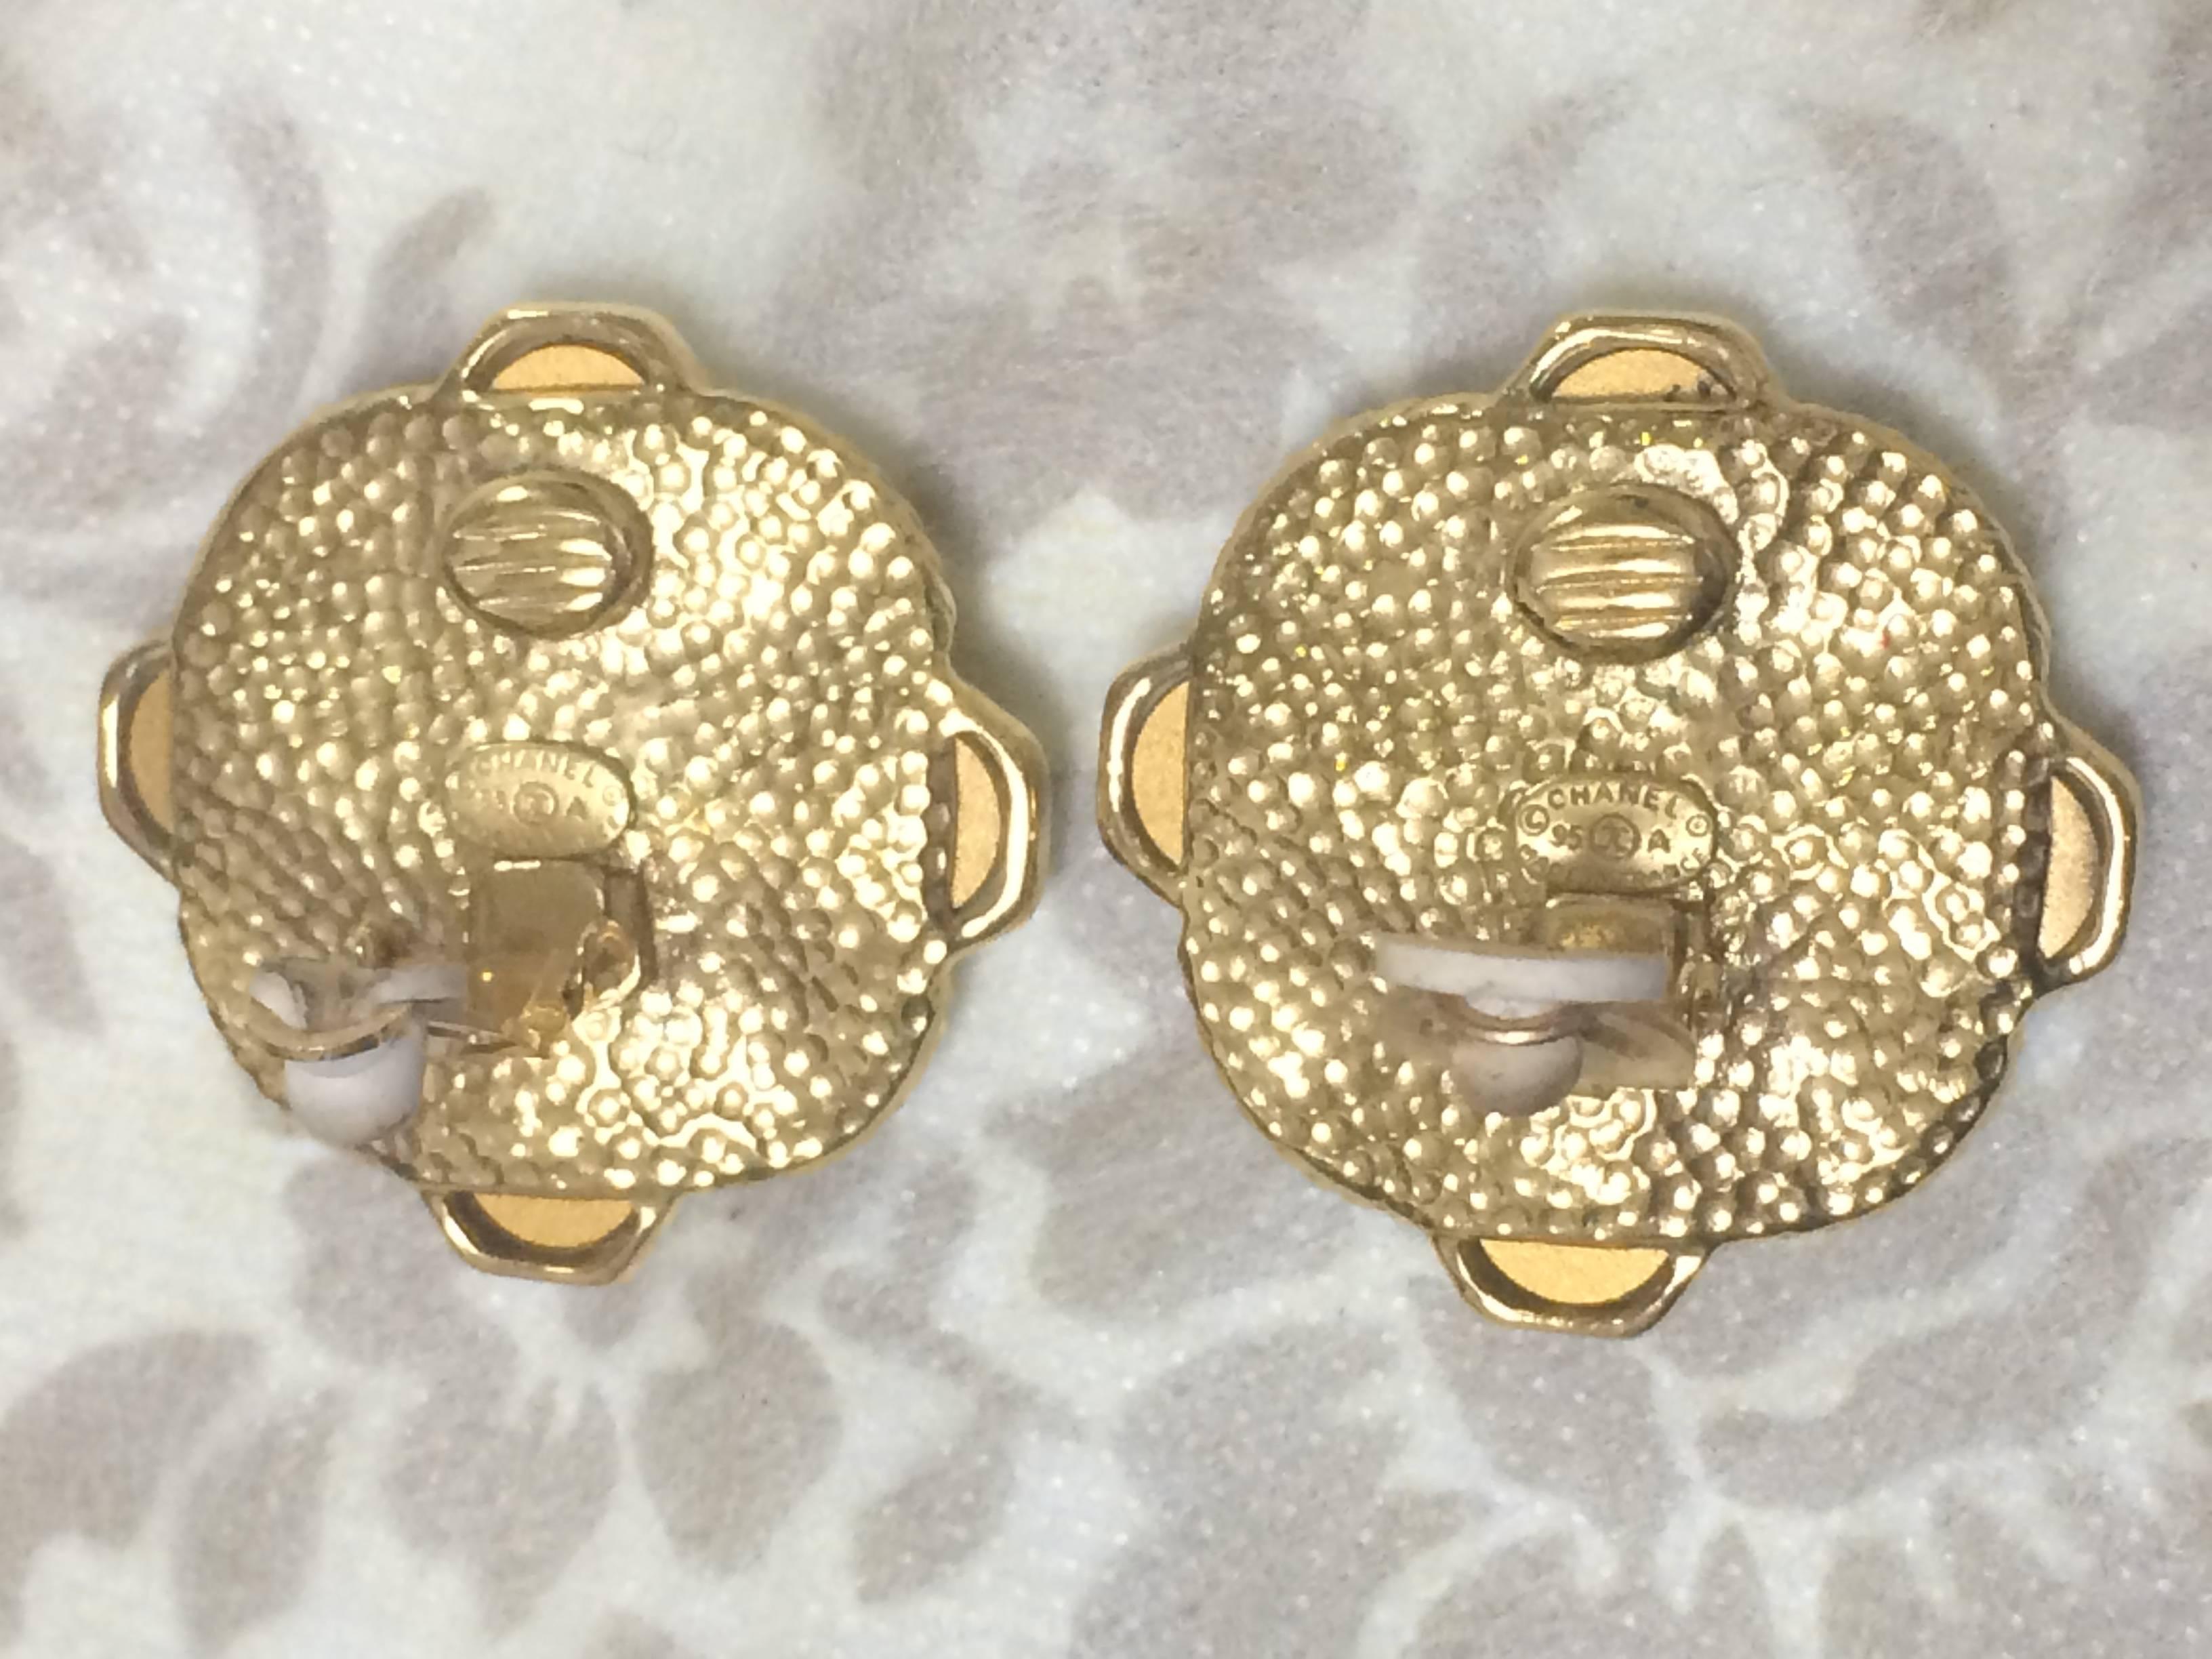 Vintage CHANEL gold tone earrings with a faux pearl, Swarovski crystal stones For Sale 2